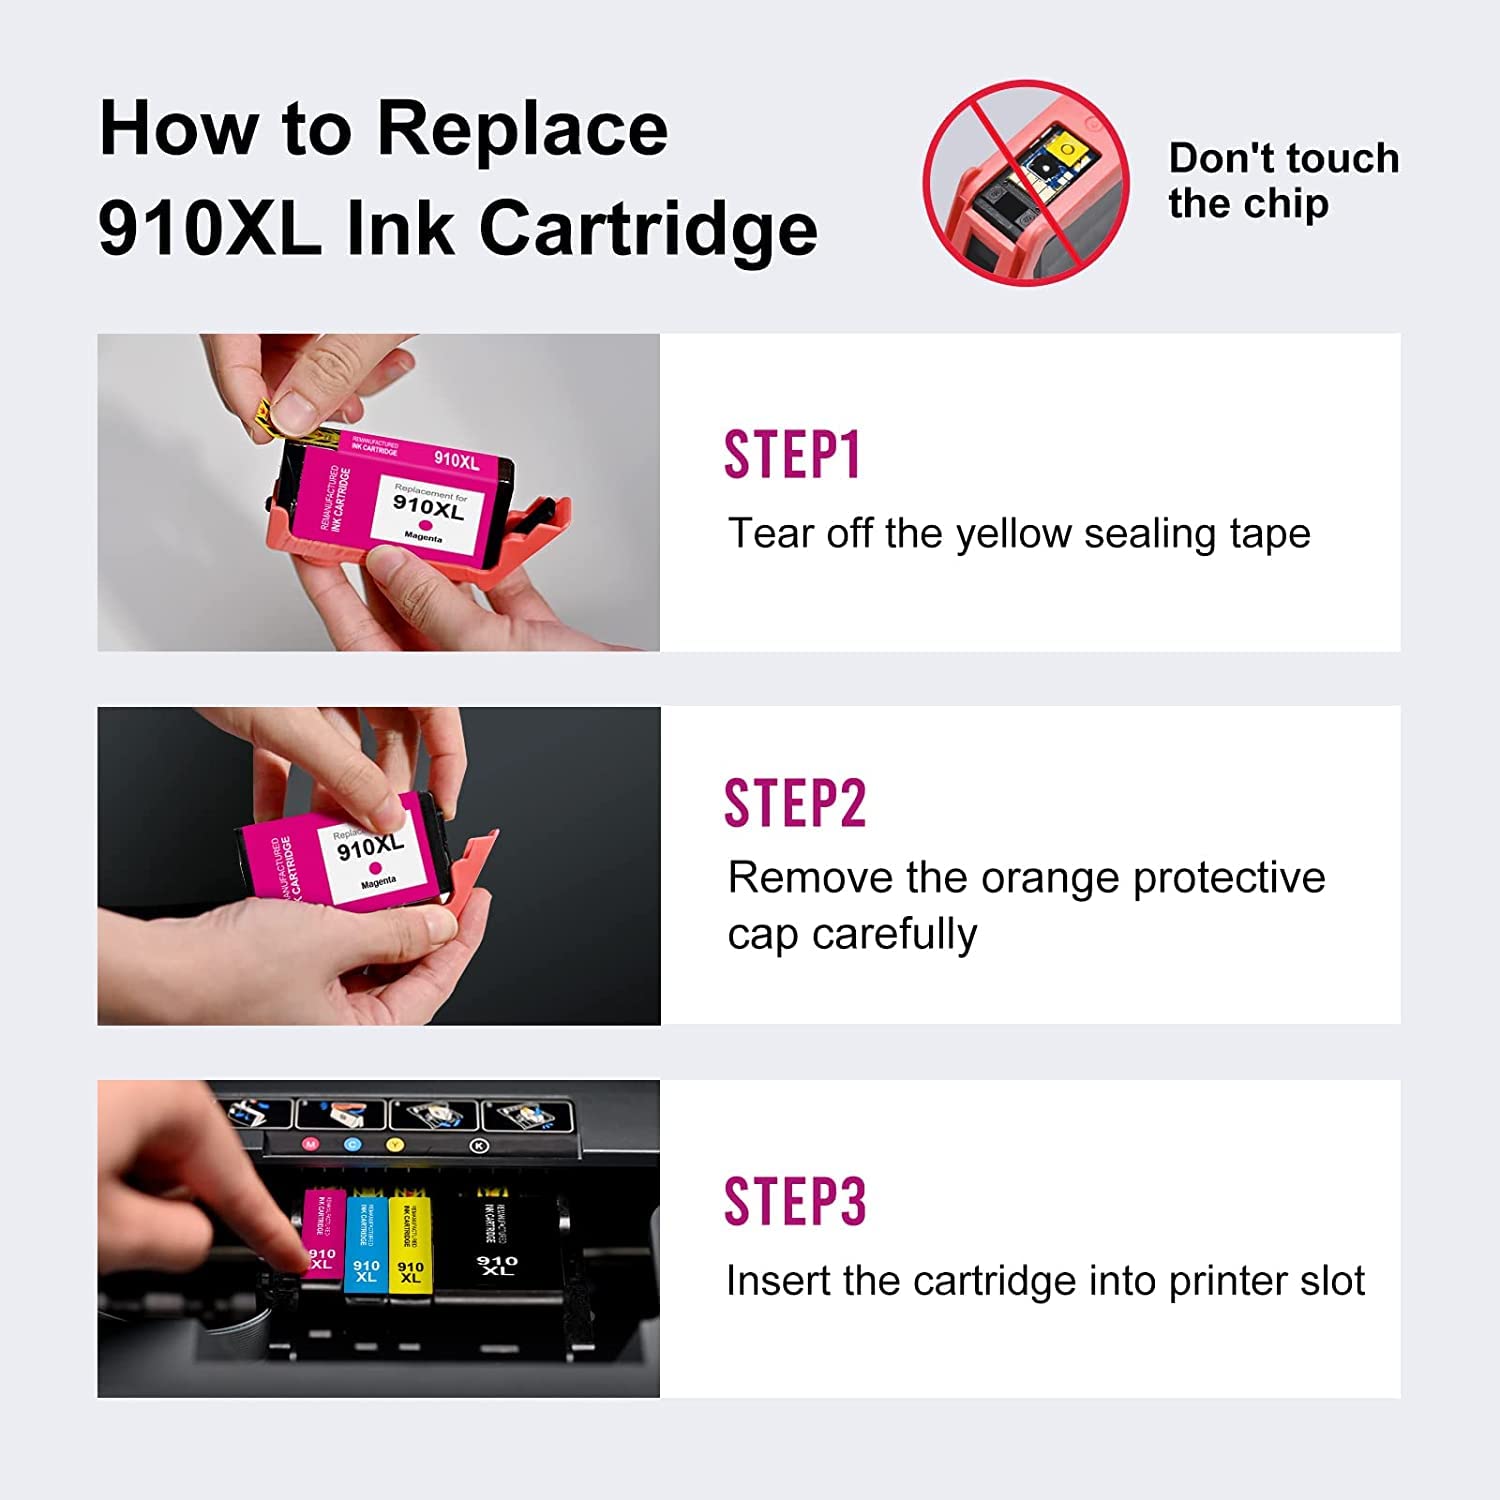 LemeroUexpect 910 910XL Remanufactured Ink Cartridge Replacement for HP 910 XL 910XL Ink Cartridge Combo Pack 4-Pack for HP Printer OfficeJet Pro 8025 8022 8035 8028, Black Cyan Magenta Yellow